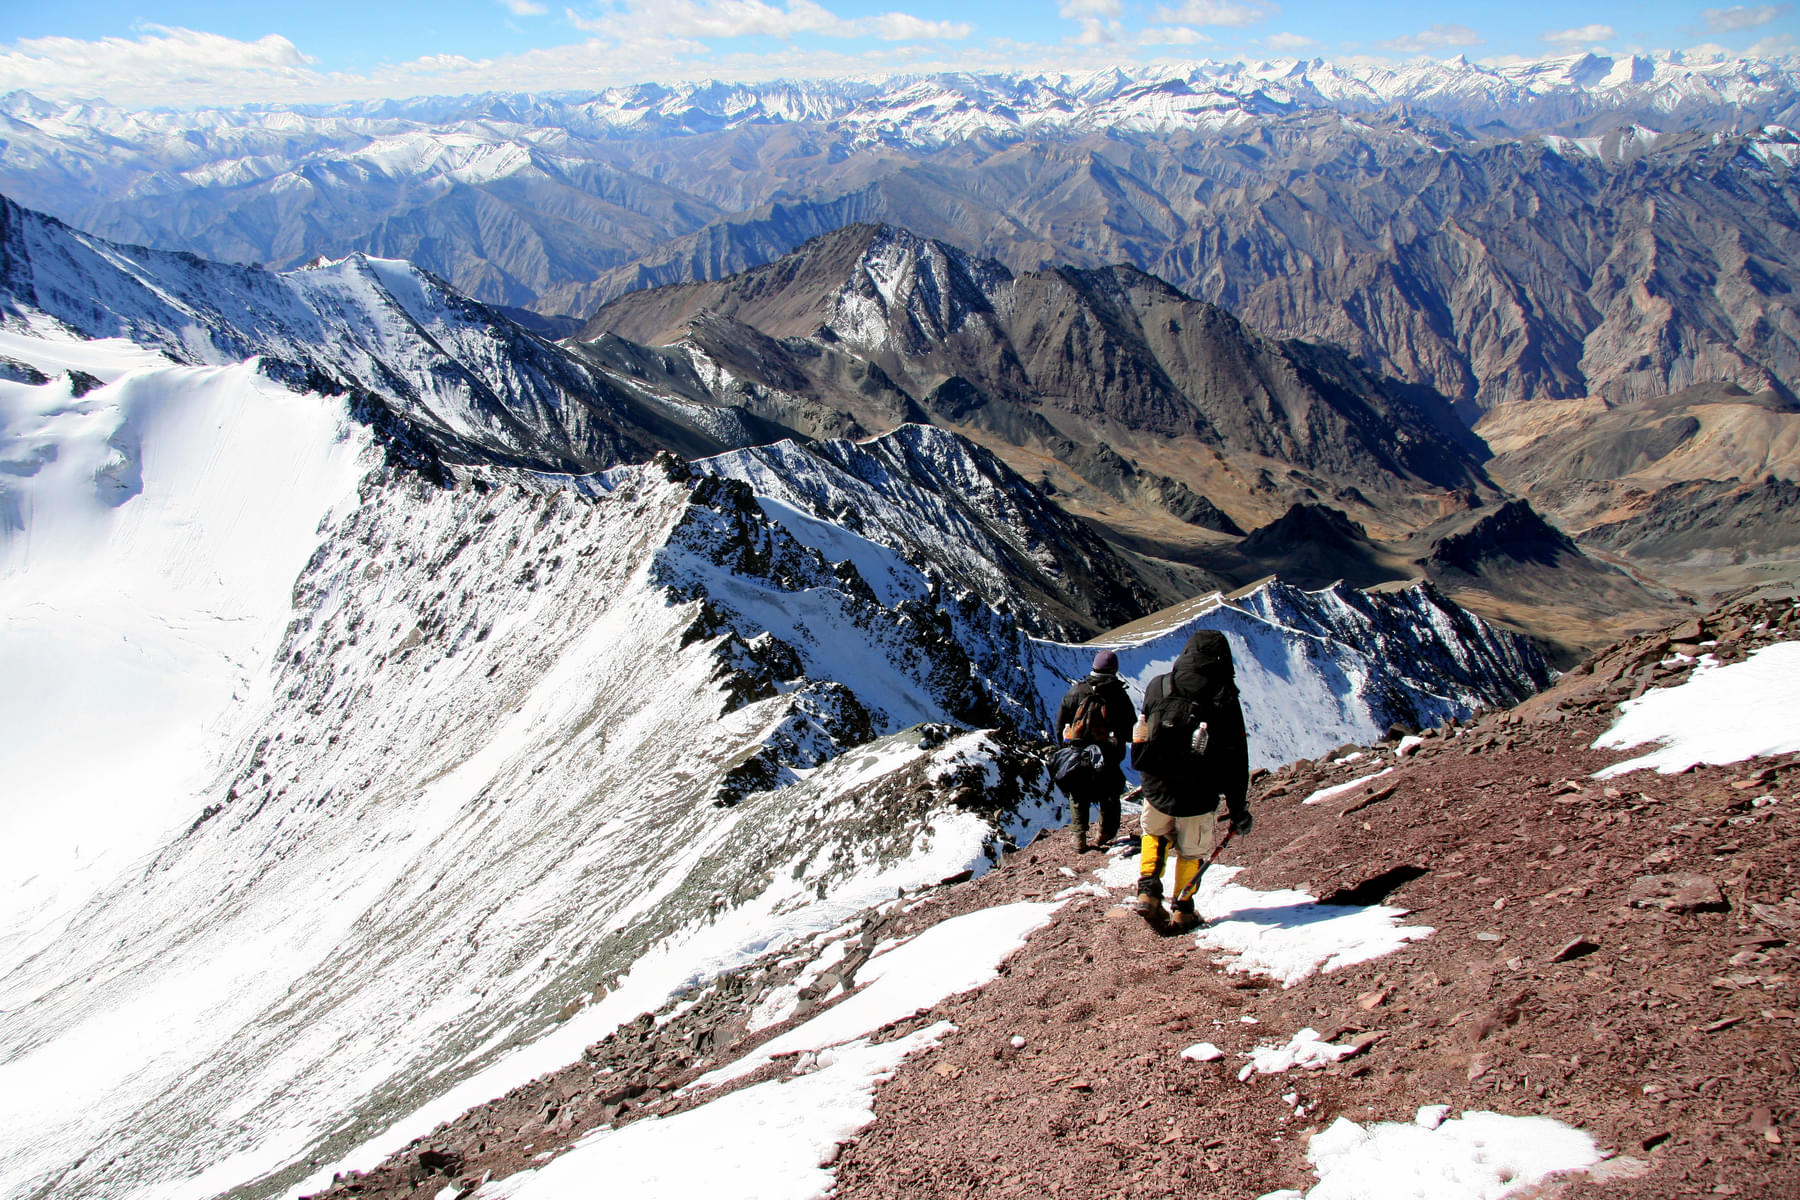 Hike through the narrow ridgeline and valleys while making your way to the summit